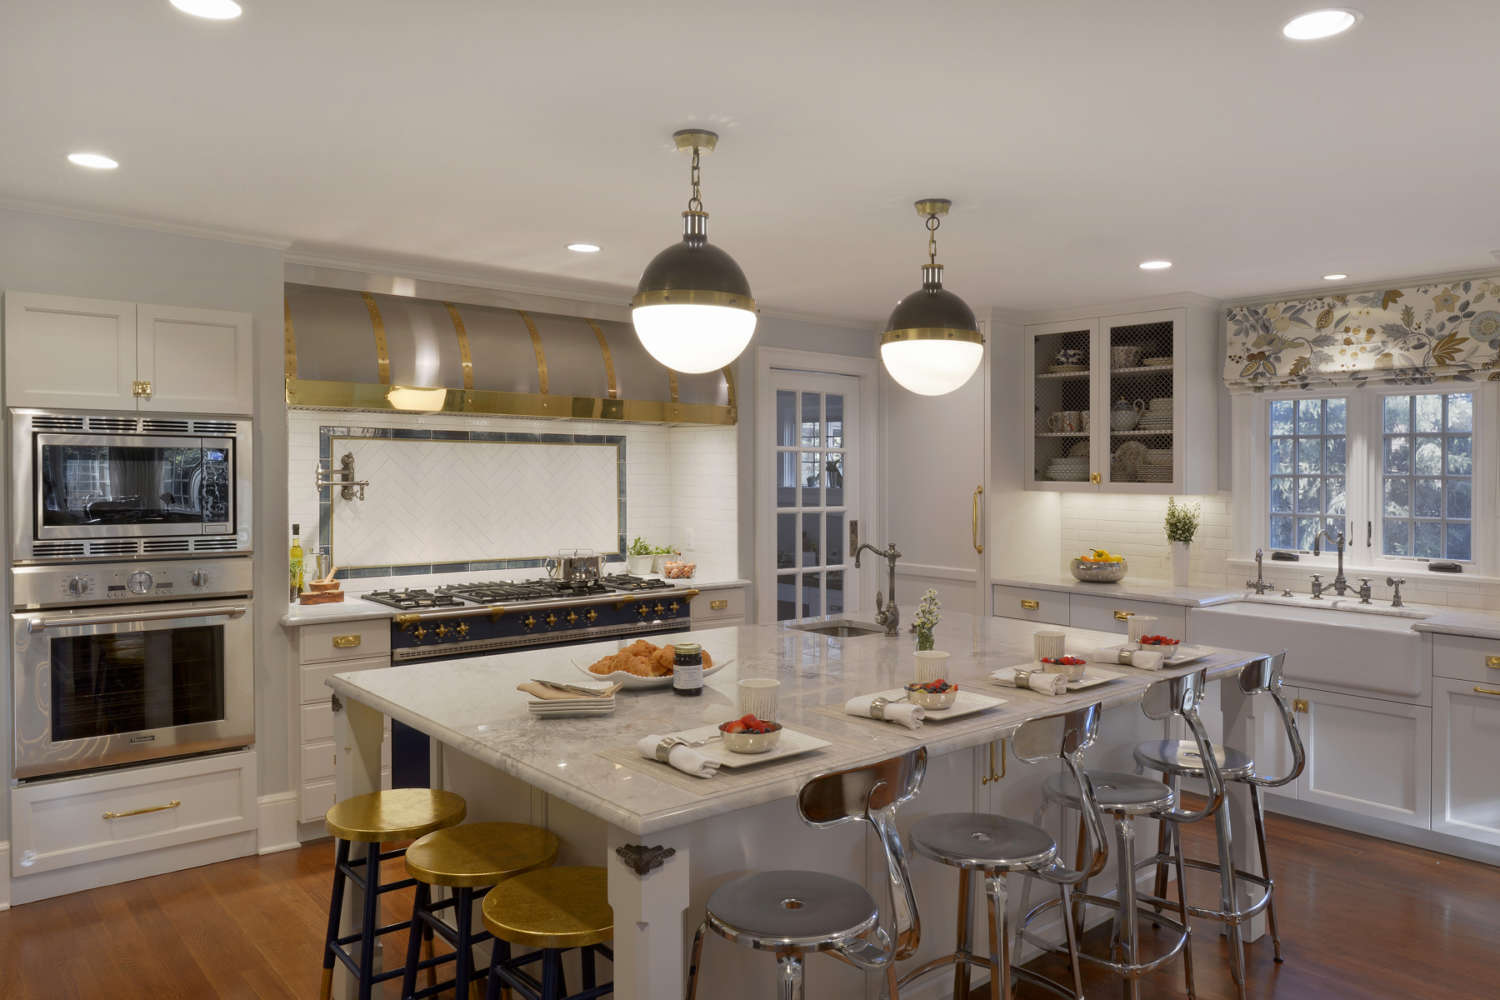 Expansive Bilotta kitchen in Scarsdale features La Cornue range with brass accented hood and Kyoto White and Kyoto Steel backsplash by Artistic Tile.